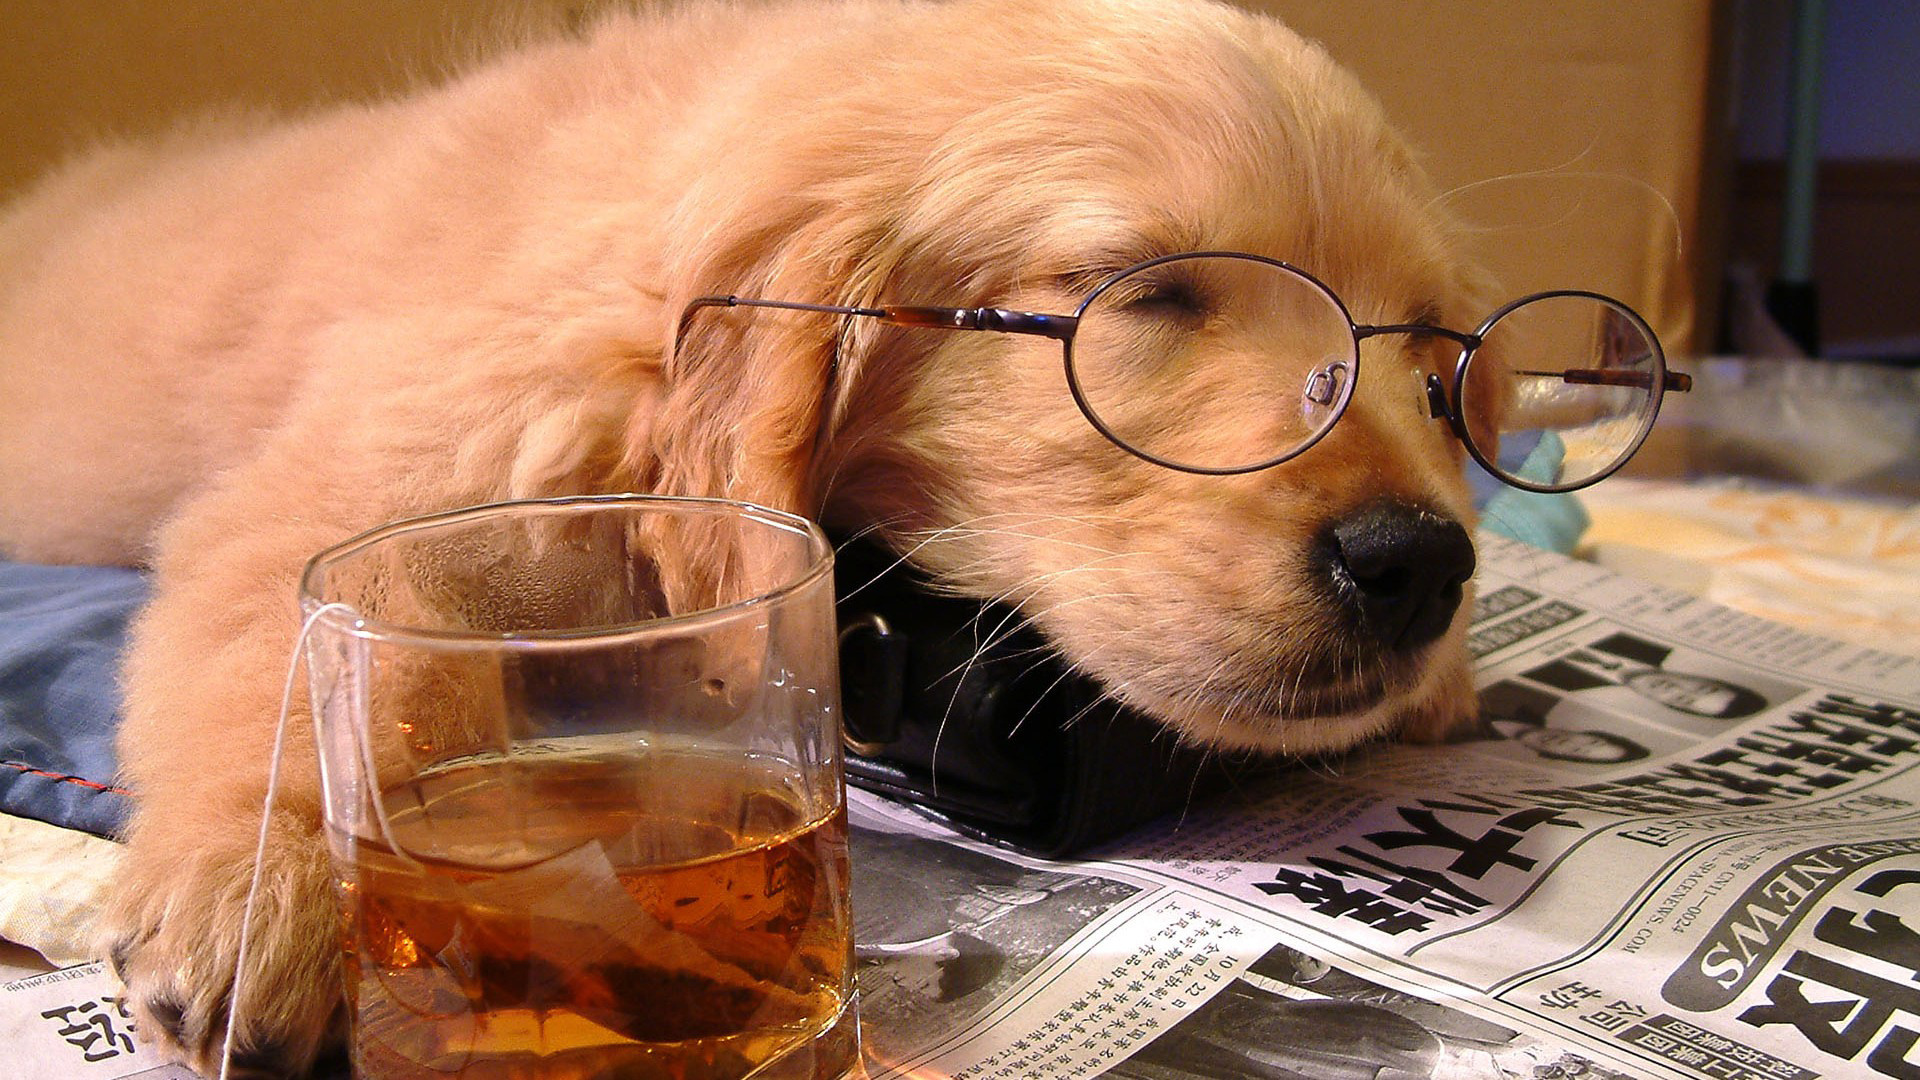 animals, Dogs, Puppy, Puppies, Fur, Face, Eyes, Ears, Nose, Whiskers, Glasses, Glass, Cup, Print, Paper, Drinks, Alcohol, Sleep, Cute, Situation, Humor, Funny Wallpaper